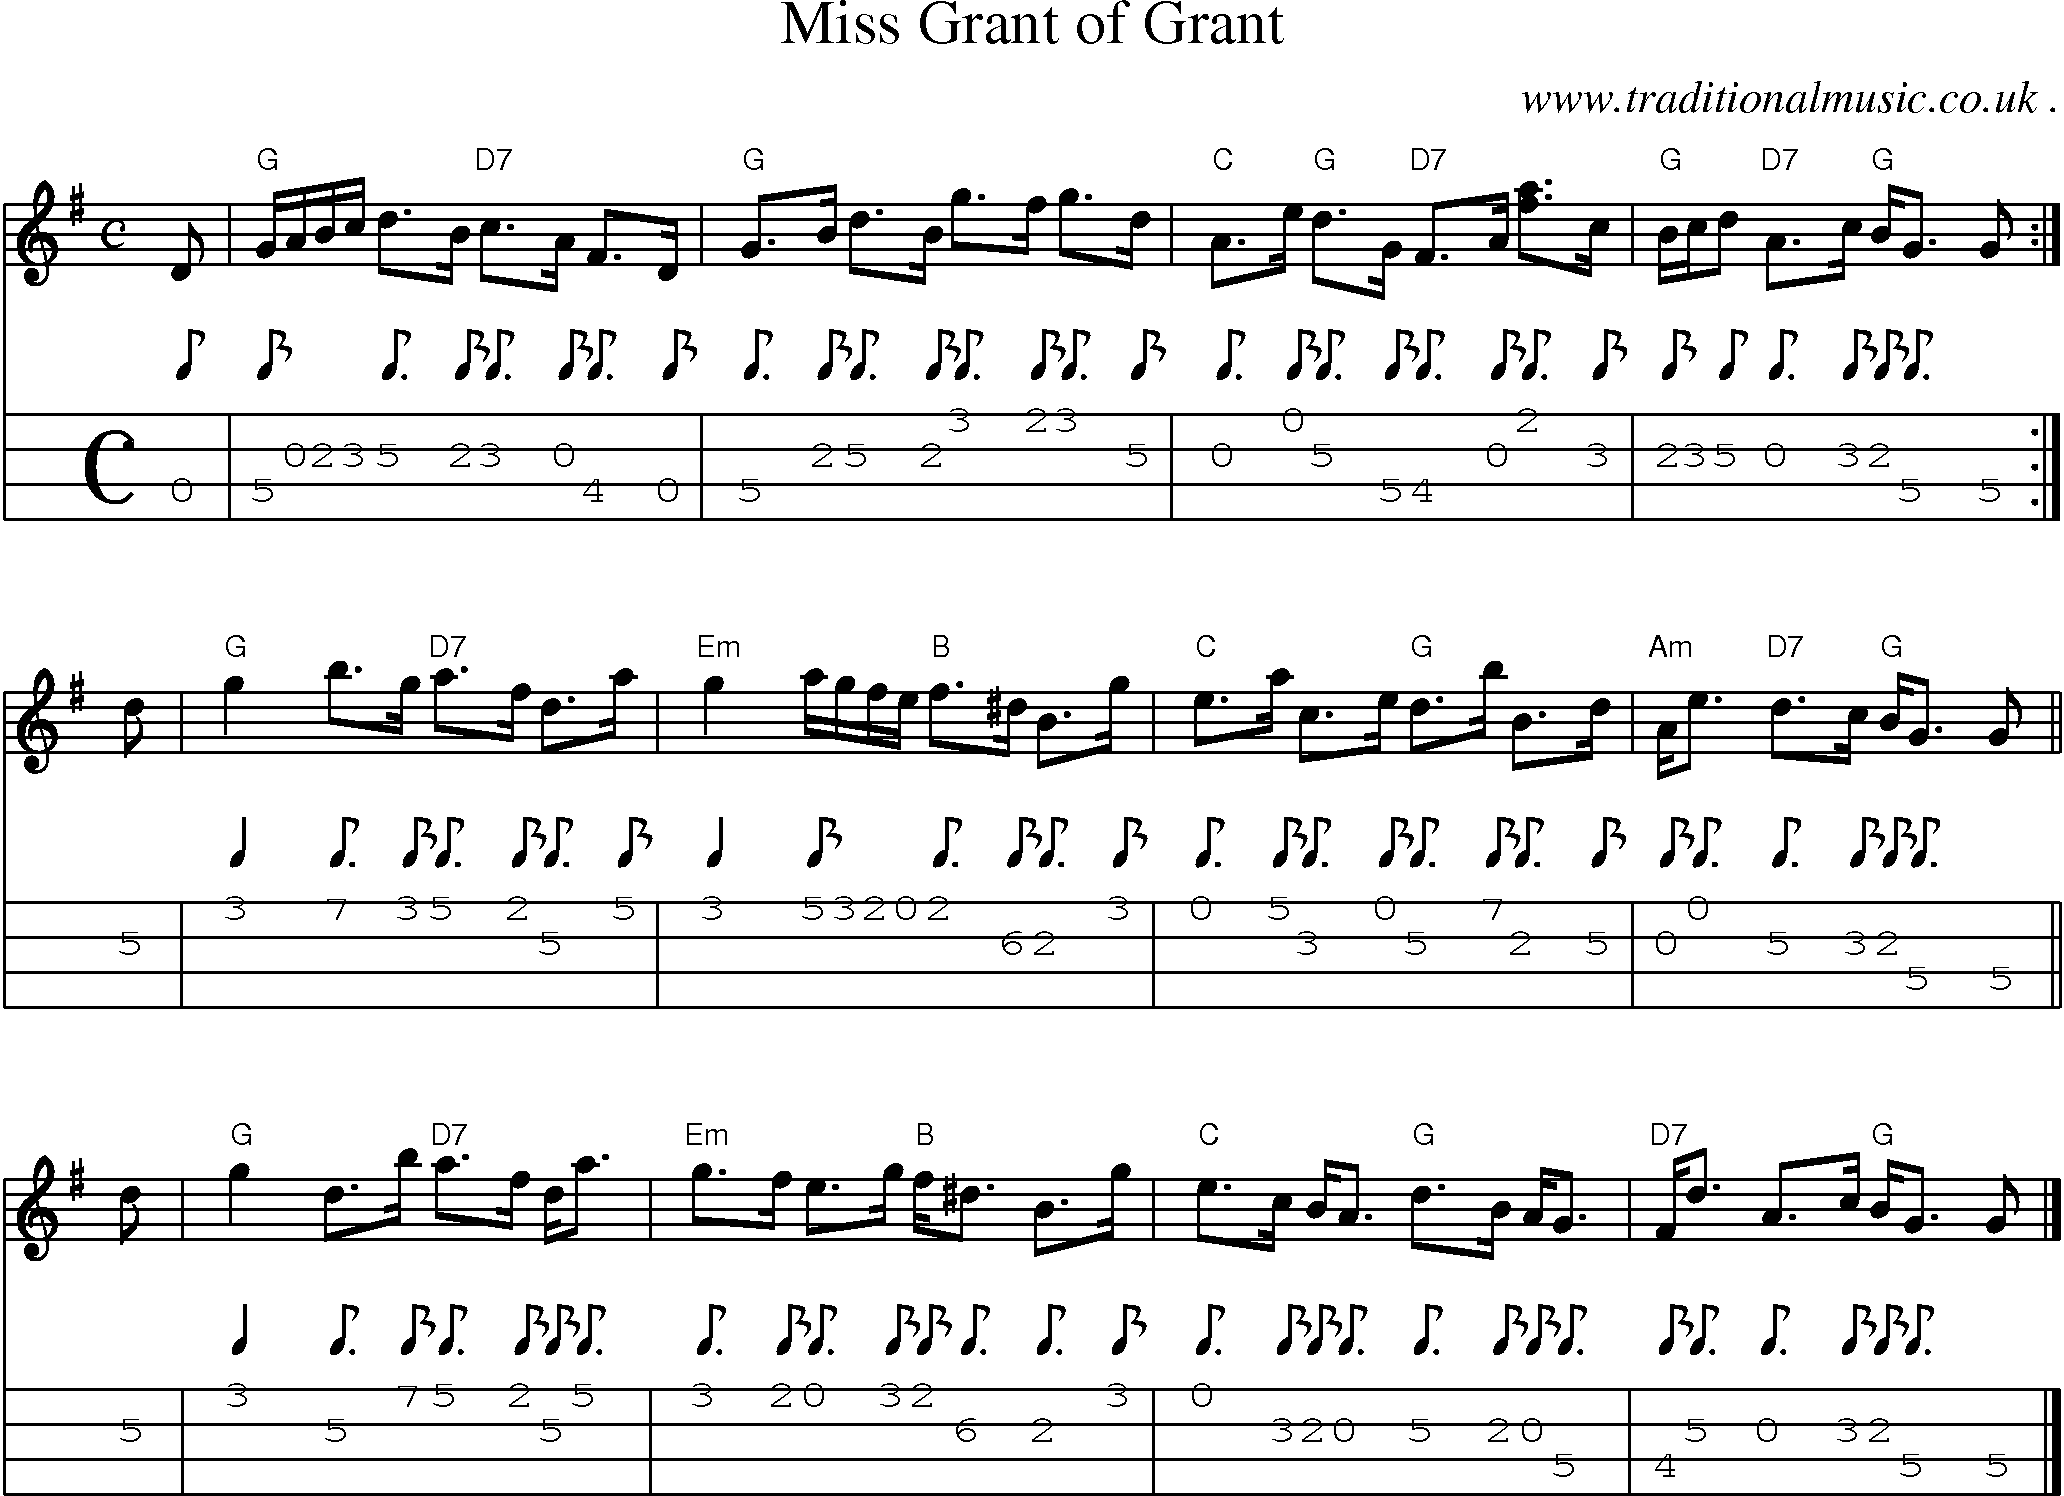 Sheet-music  score, Chords and Mandolin Tabs for Miss Grant Of Grant